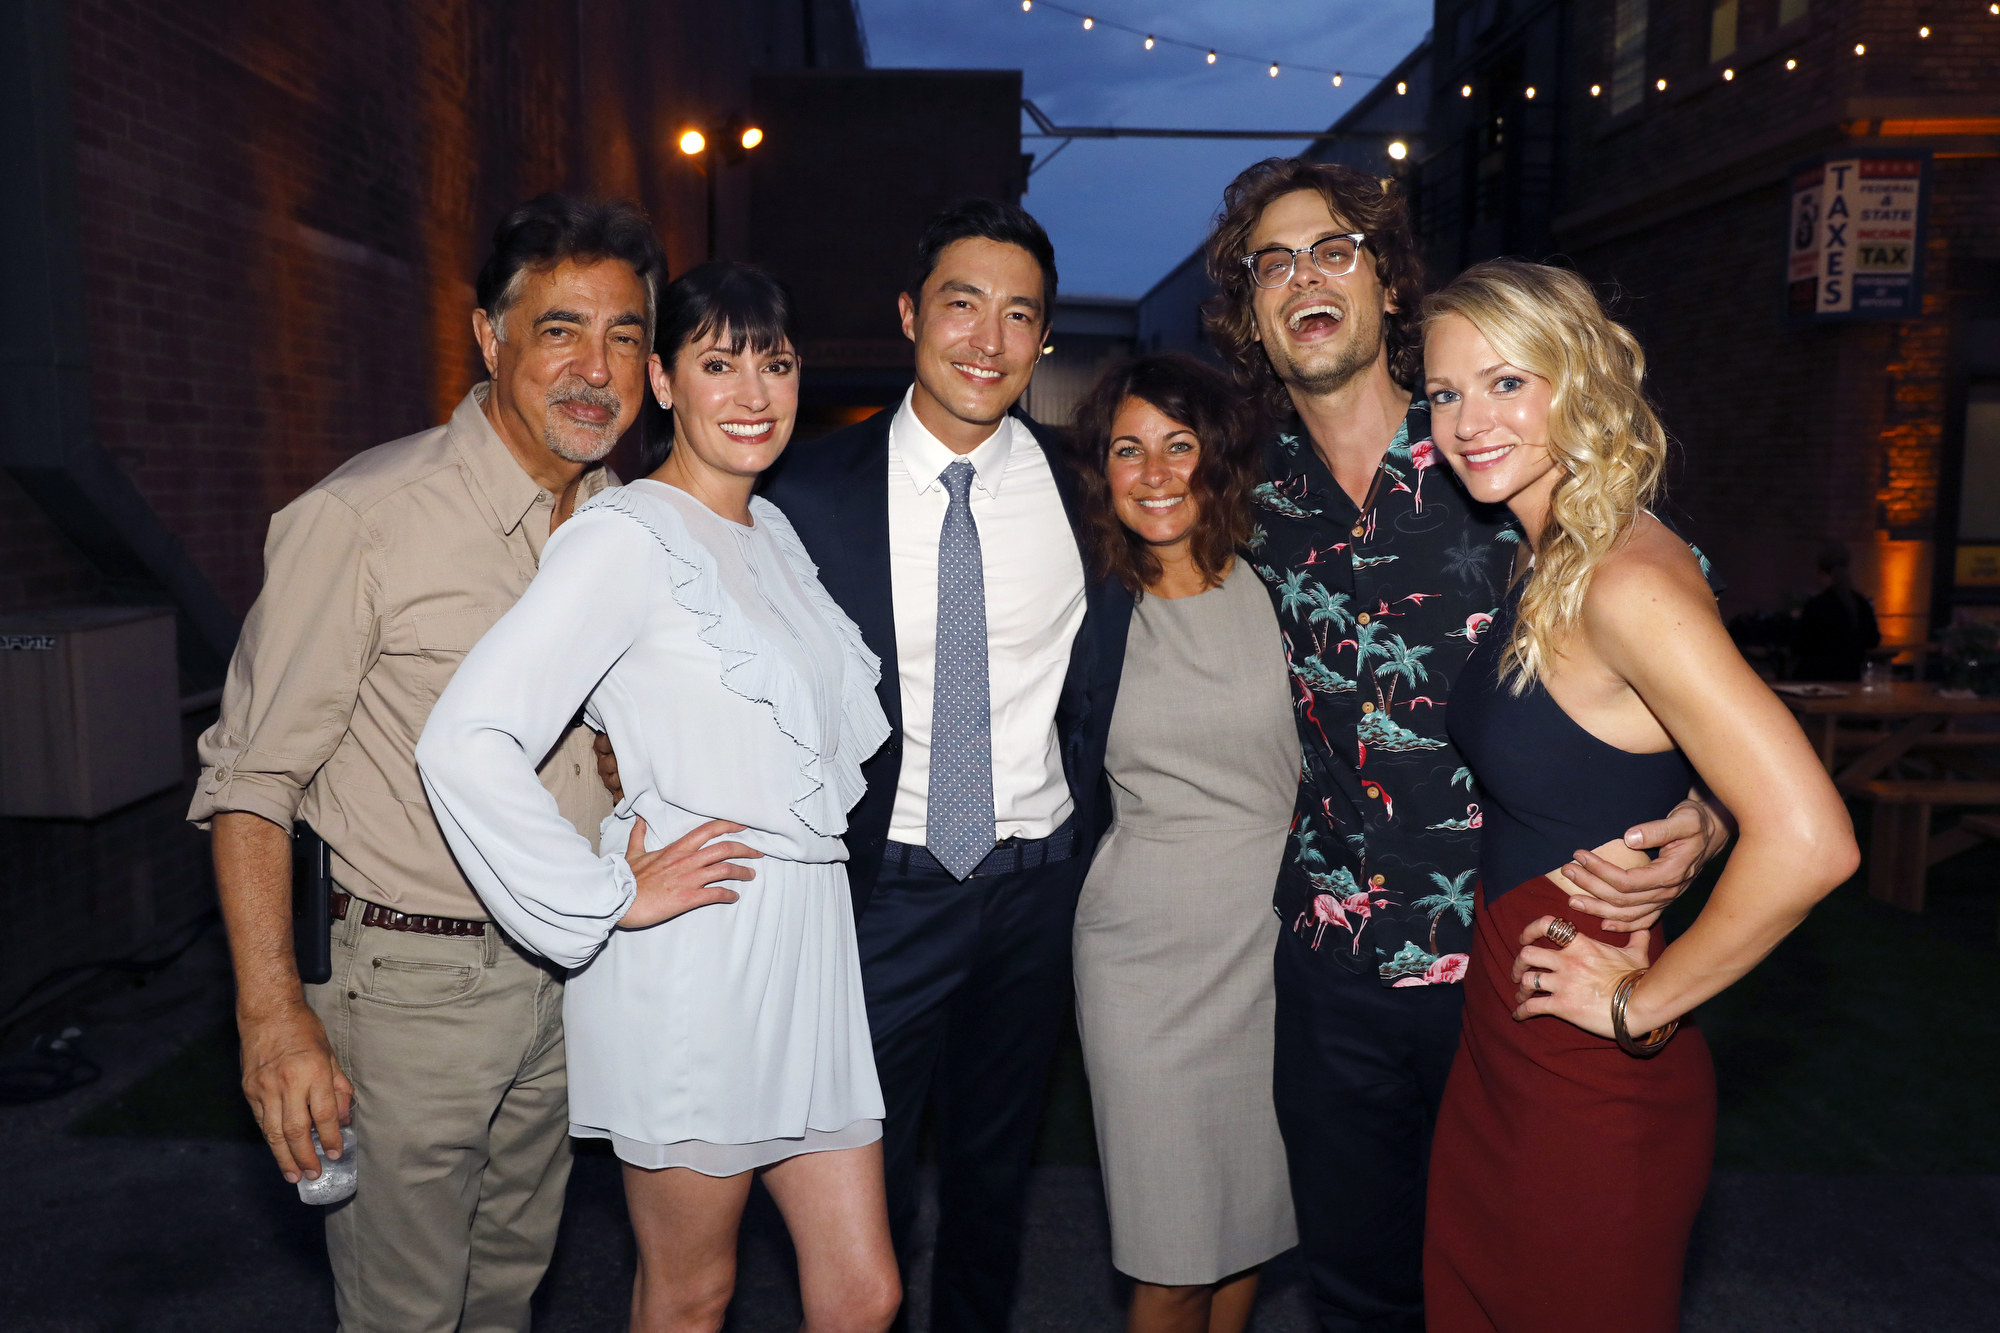 Joe Mantegna, Paget, Daniel, Erica, Matthew, and A.J. Cook posing for a group photo